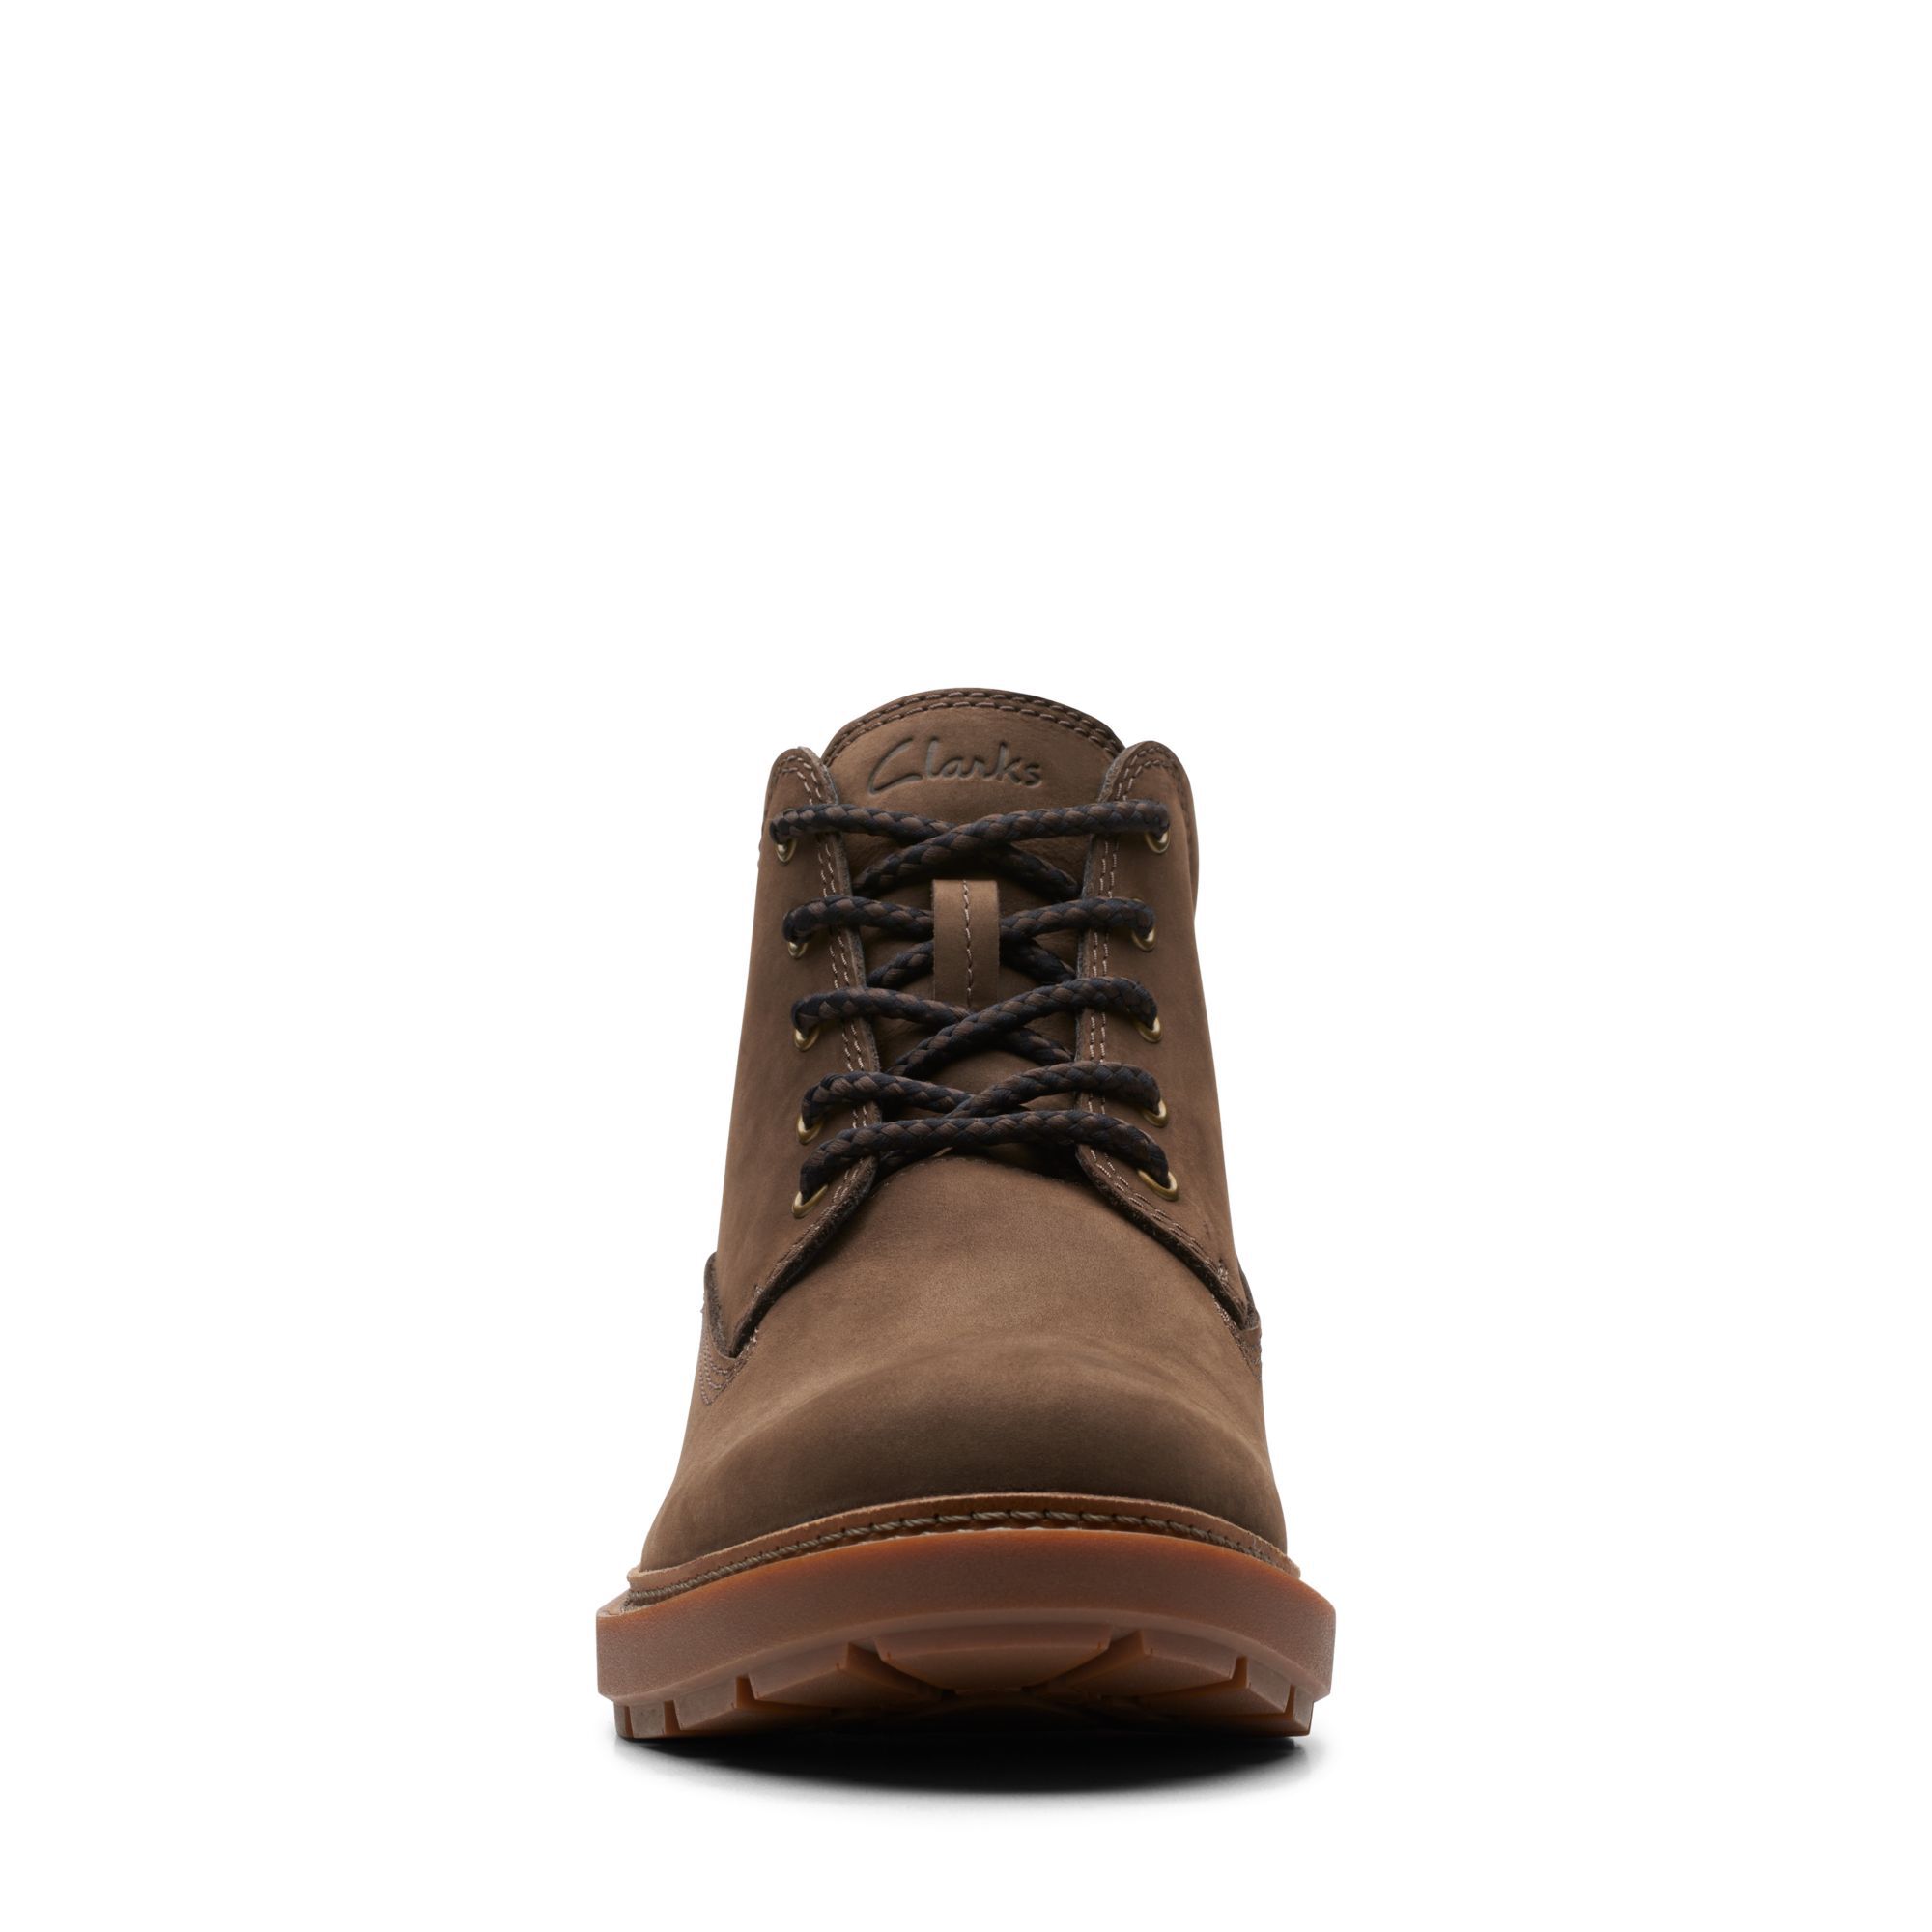 Clarks Craftdale 2 Mgtx - Brown Nubuck leather